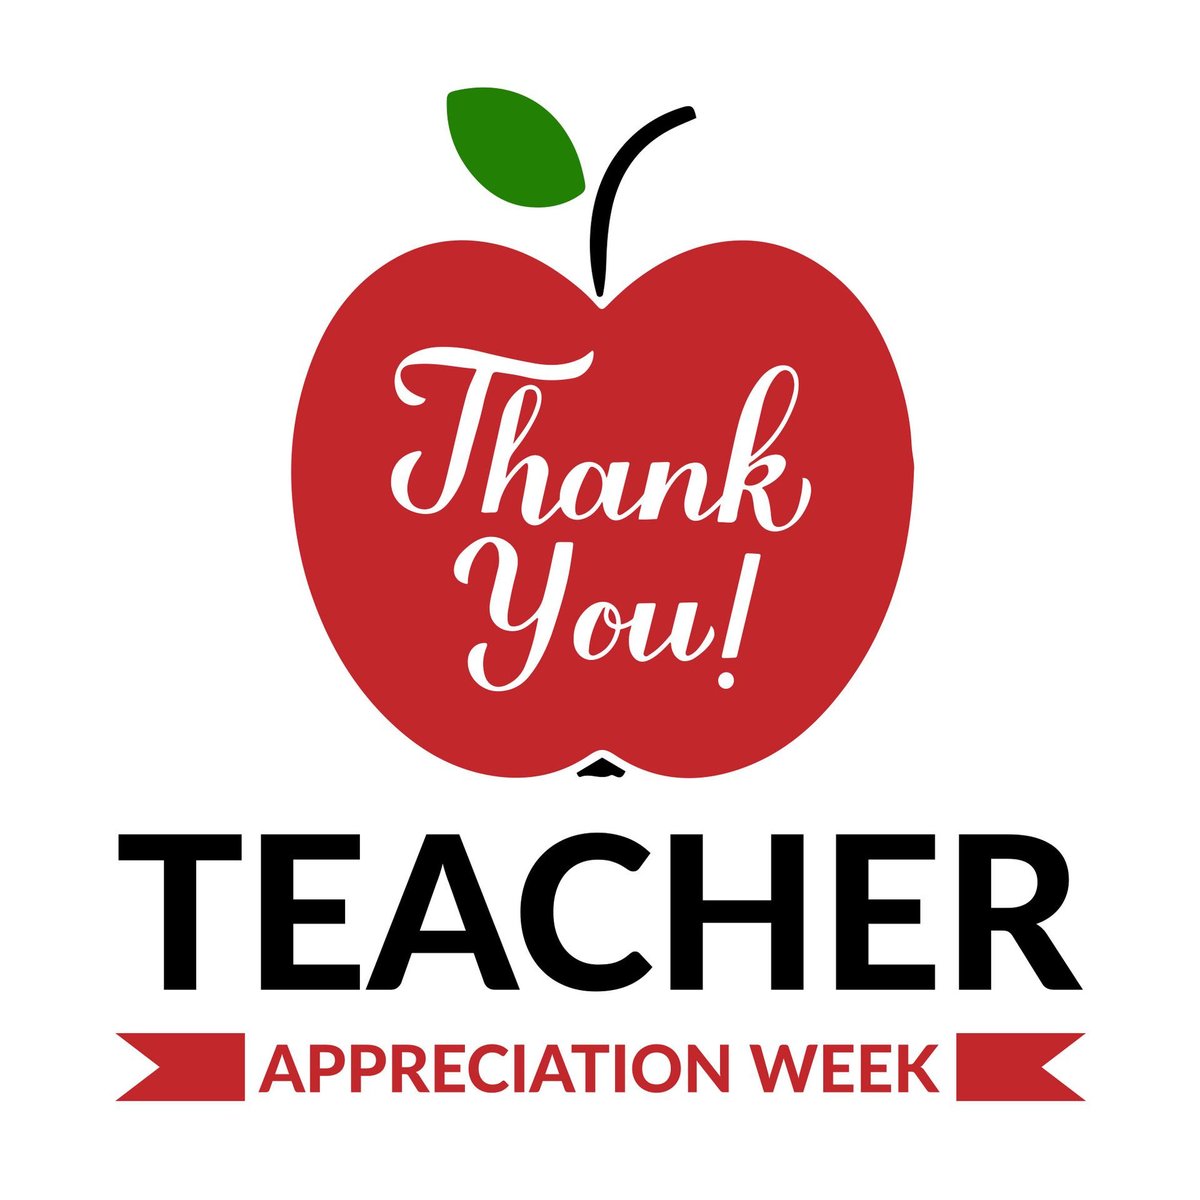 As we celebrate Teacher Appreciation Week let's say 'Thank You!' to the educators that work tirelessly to inspire passion and curiosity in our children. I'm grateful to the teachers who have impacted my life and love to see the same spark of learning reflected in my own kids.